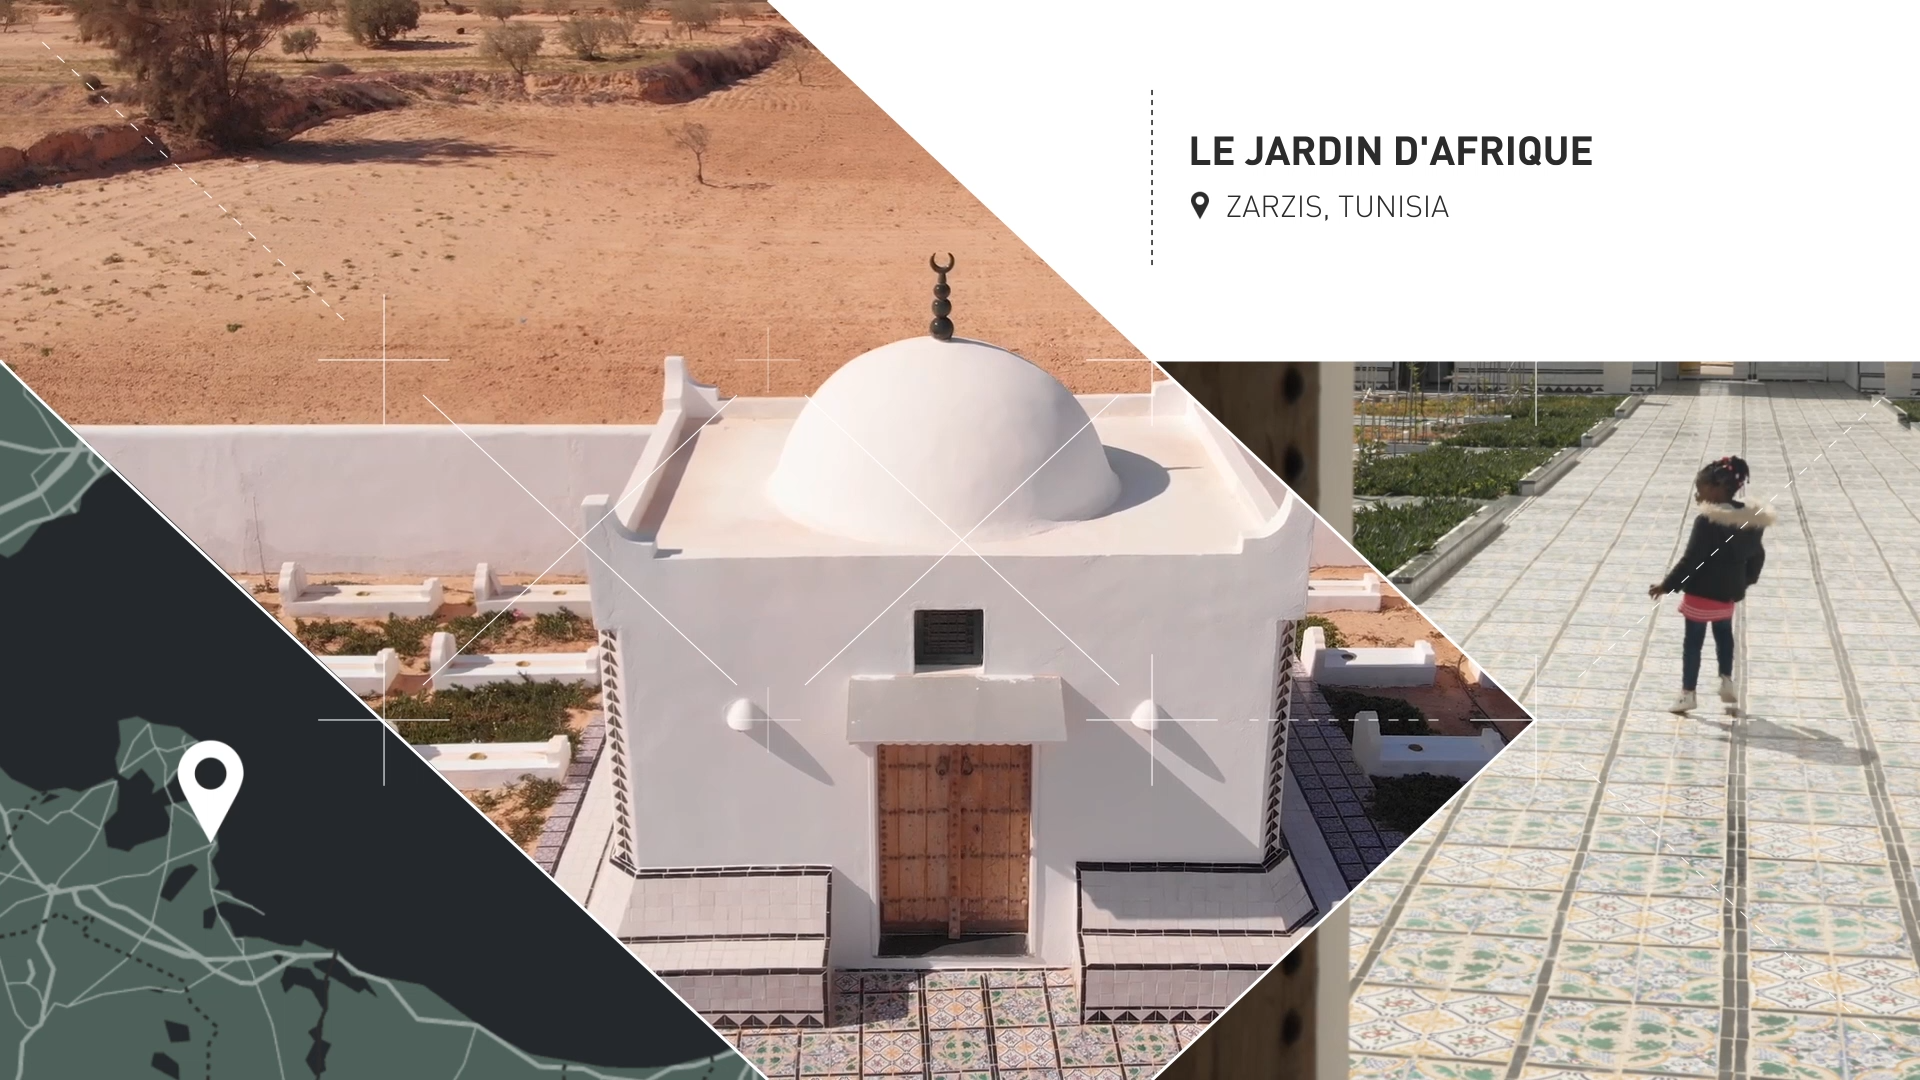 <p>Le Jardin d'Afrique,&nbsp;Zarzis, Tunisia, by Rachid Koraïchi: An ecumenical cemetery provides a sanctuary and dignified place of final repose for the hundreds of unburied bodies that had been washing ashore.</p>